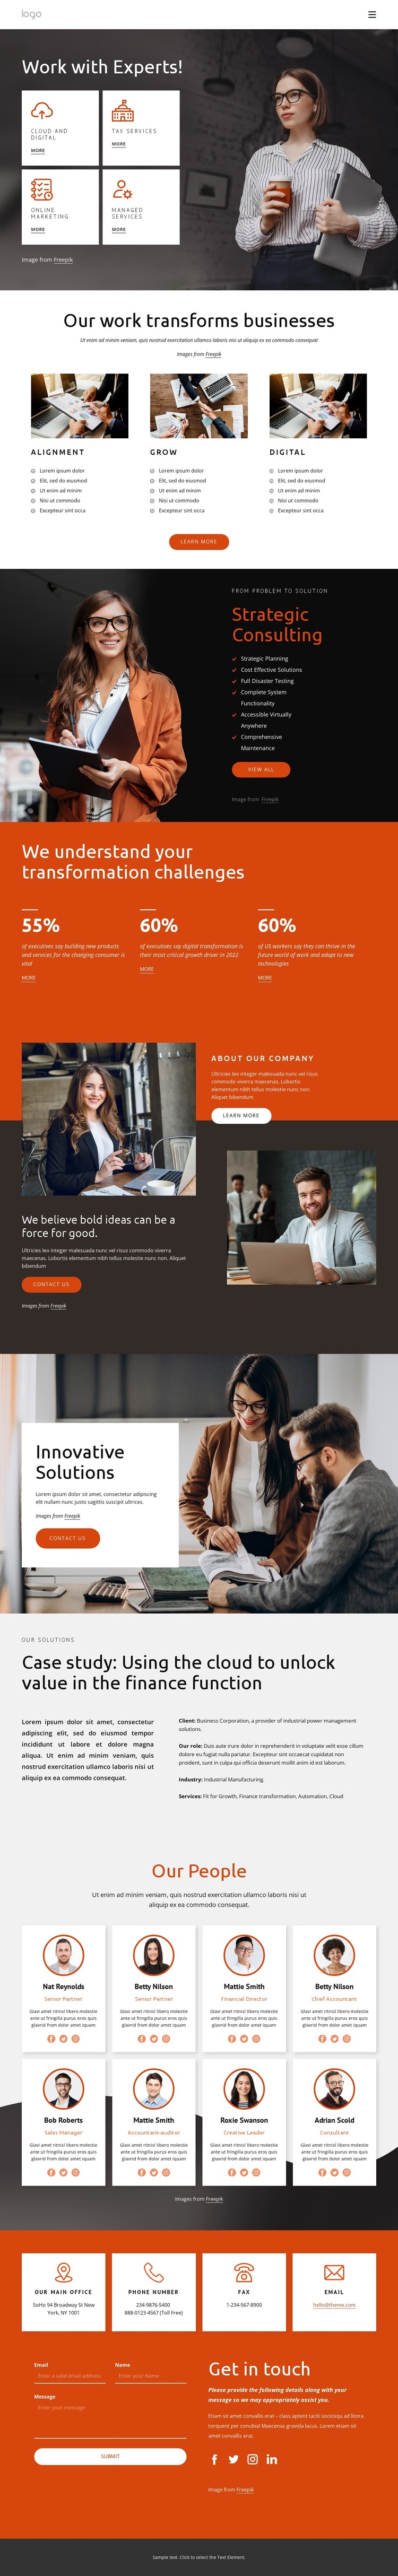 Work with experts HTML5 Template